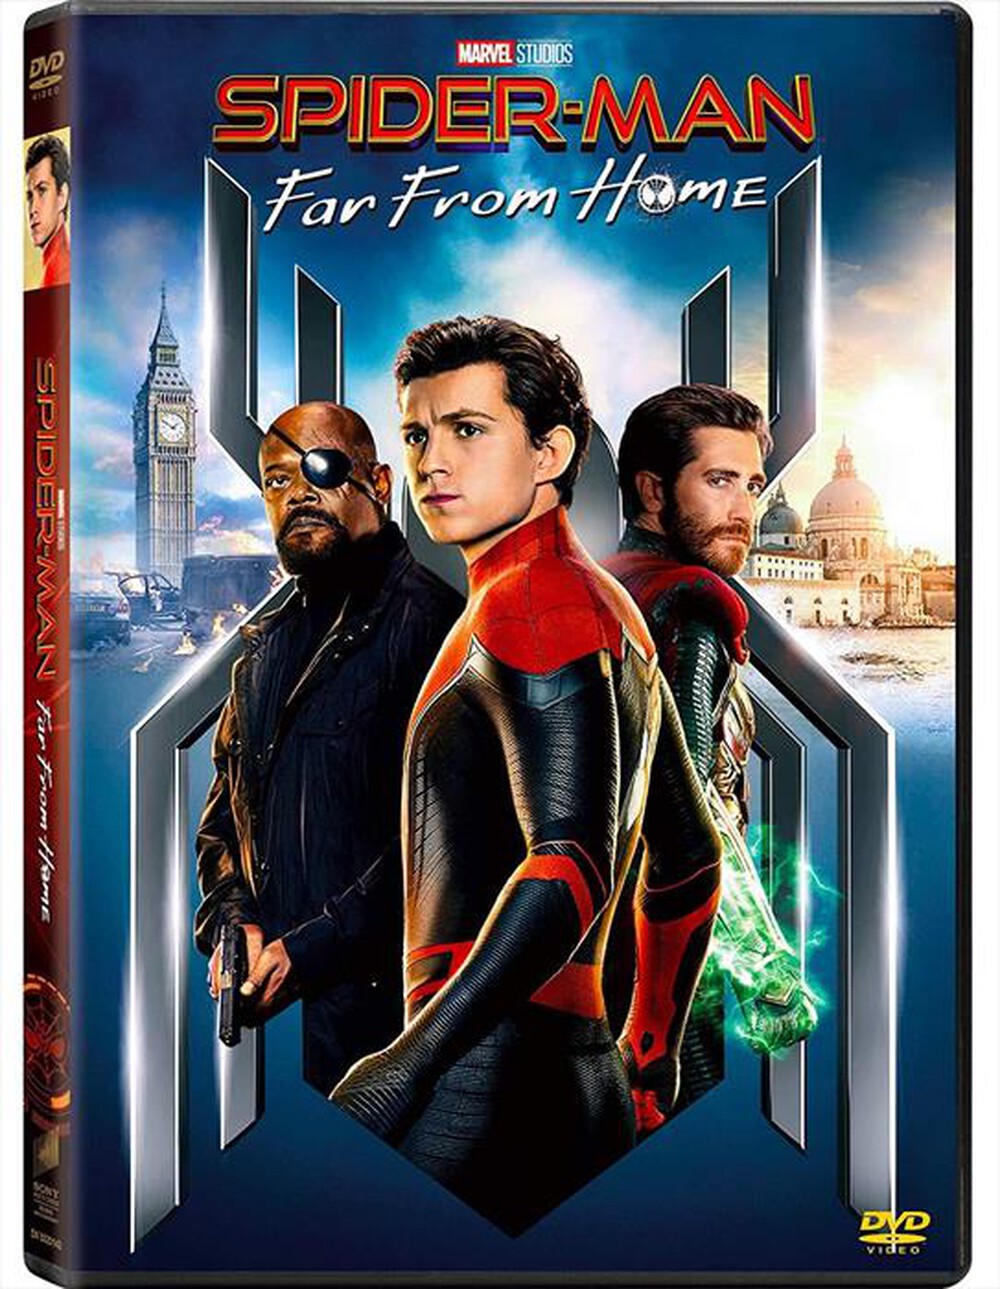 "EAGLE PICTURES - Spider-Man: Far From Home"